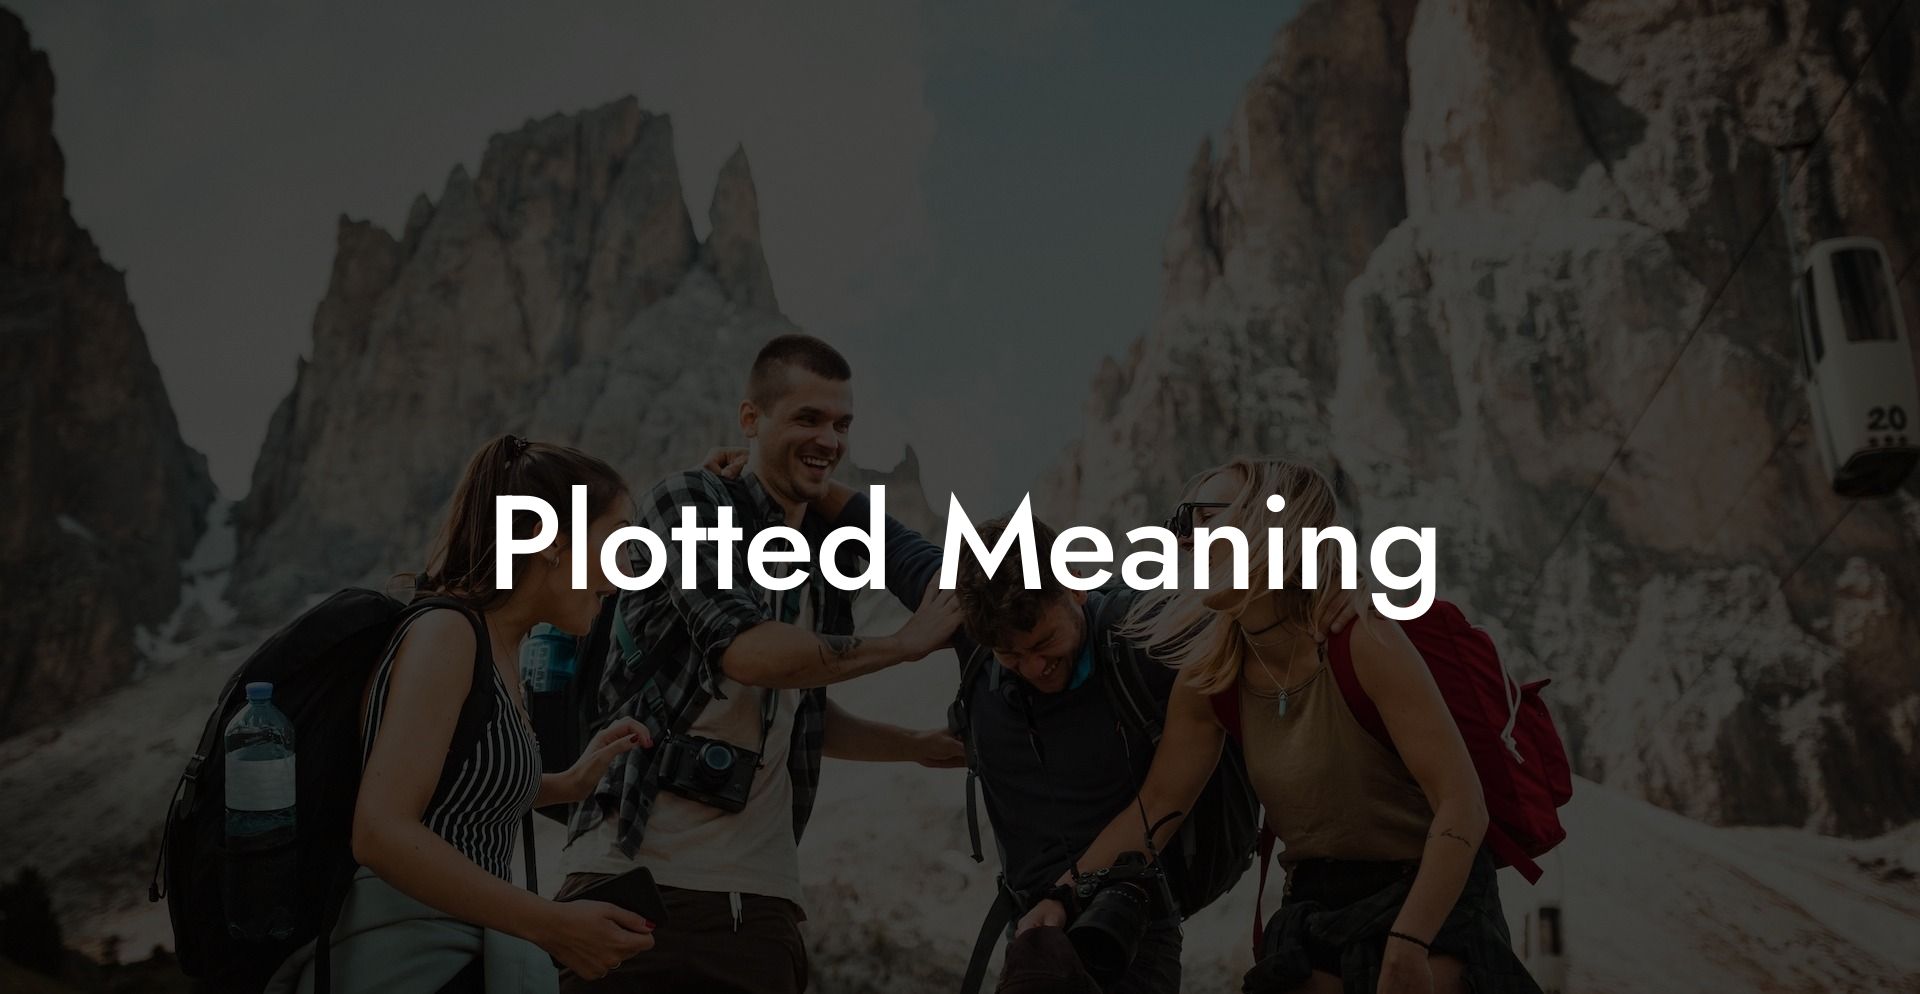 Plotted Meaning